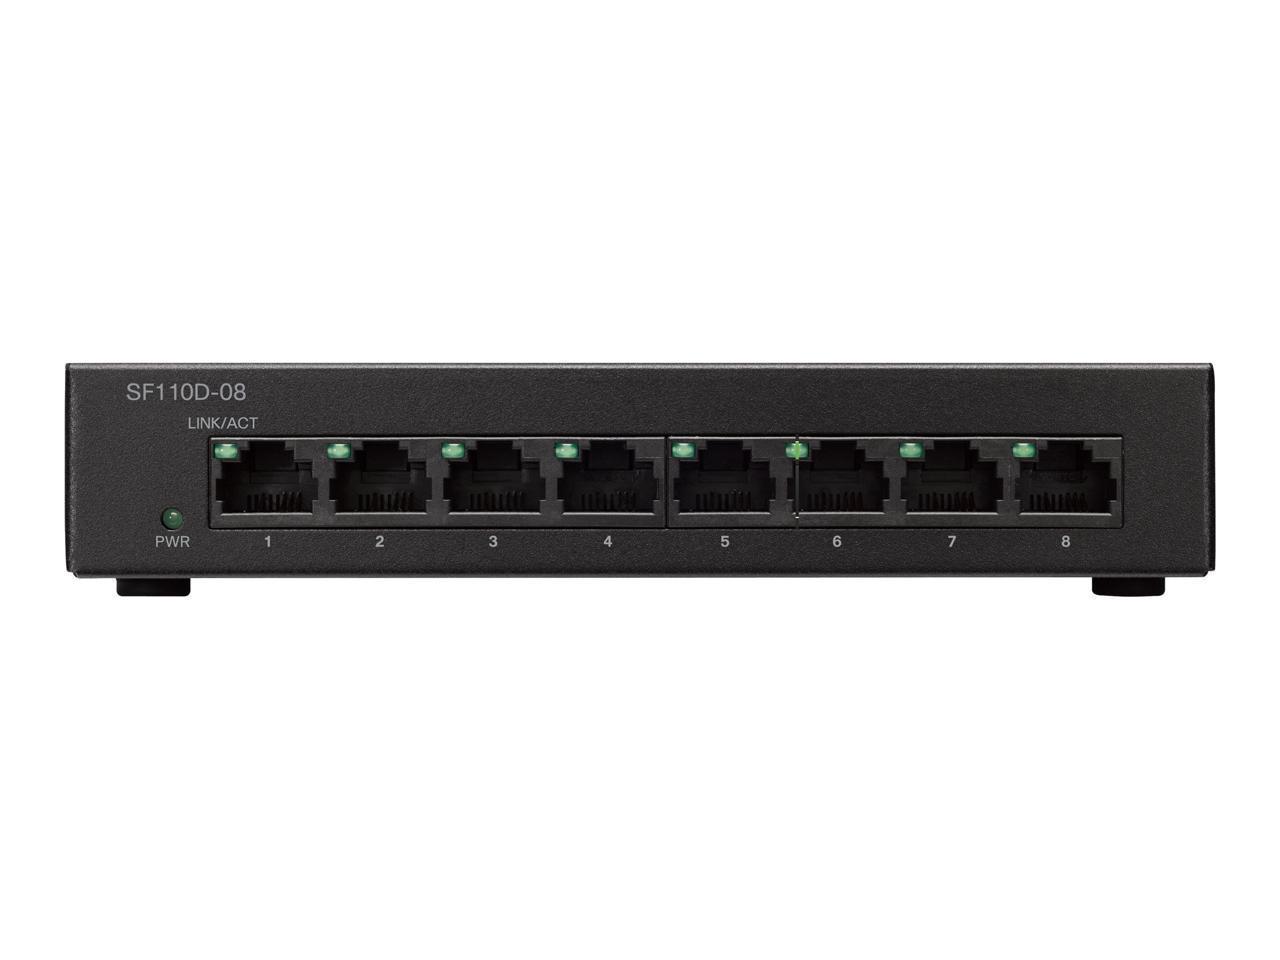 Cisco SF110D-08 Unmanaged Ethernet Switch